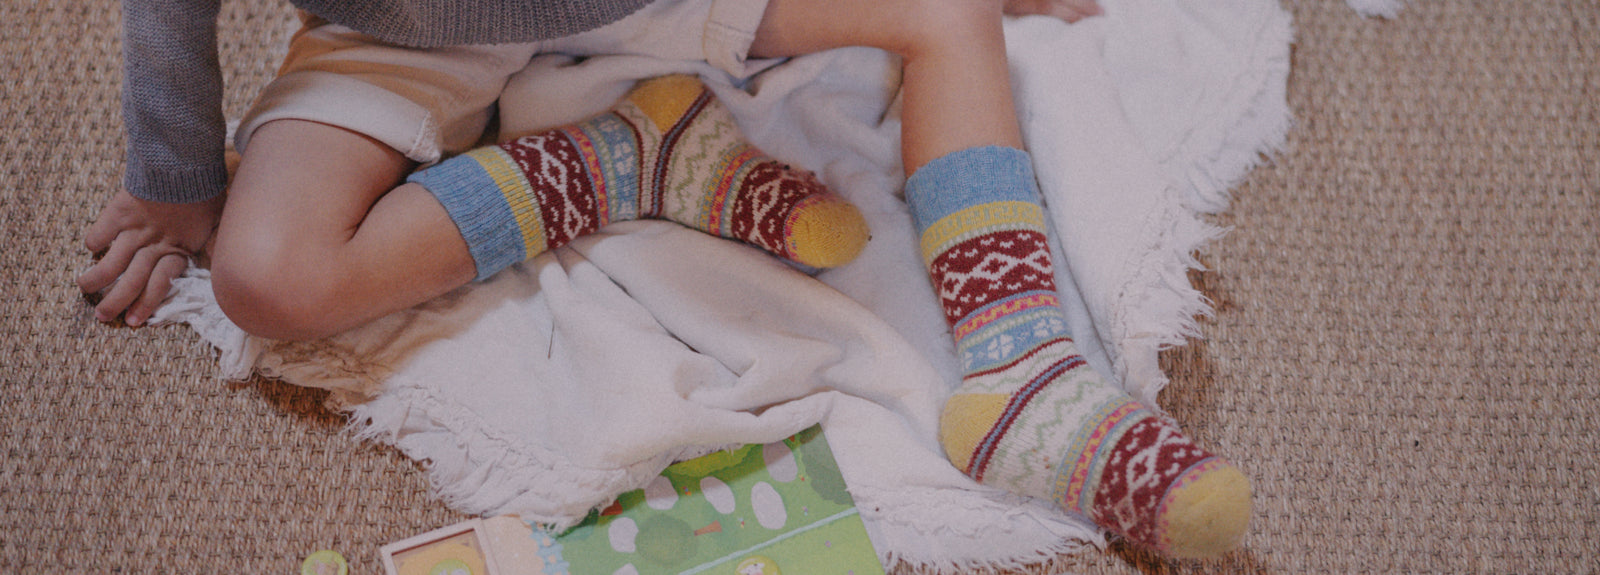 Stylish Socks That Will Keep Your Toes Toasty During The Winter